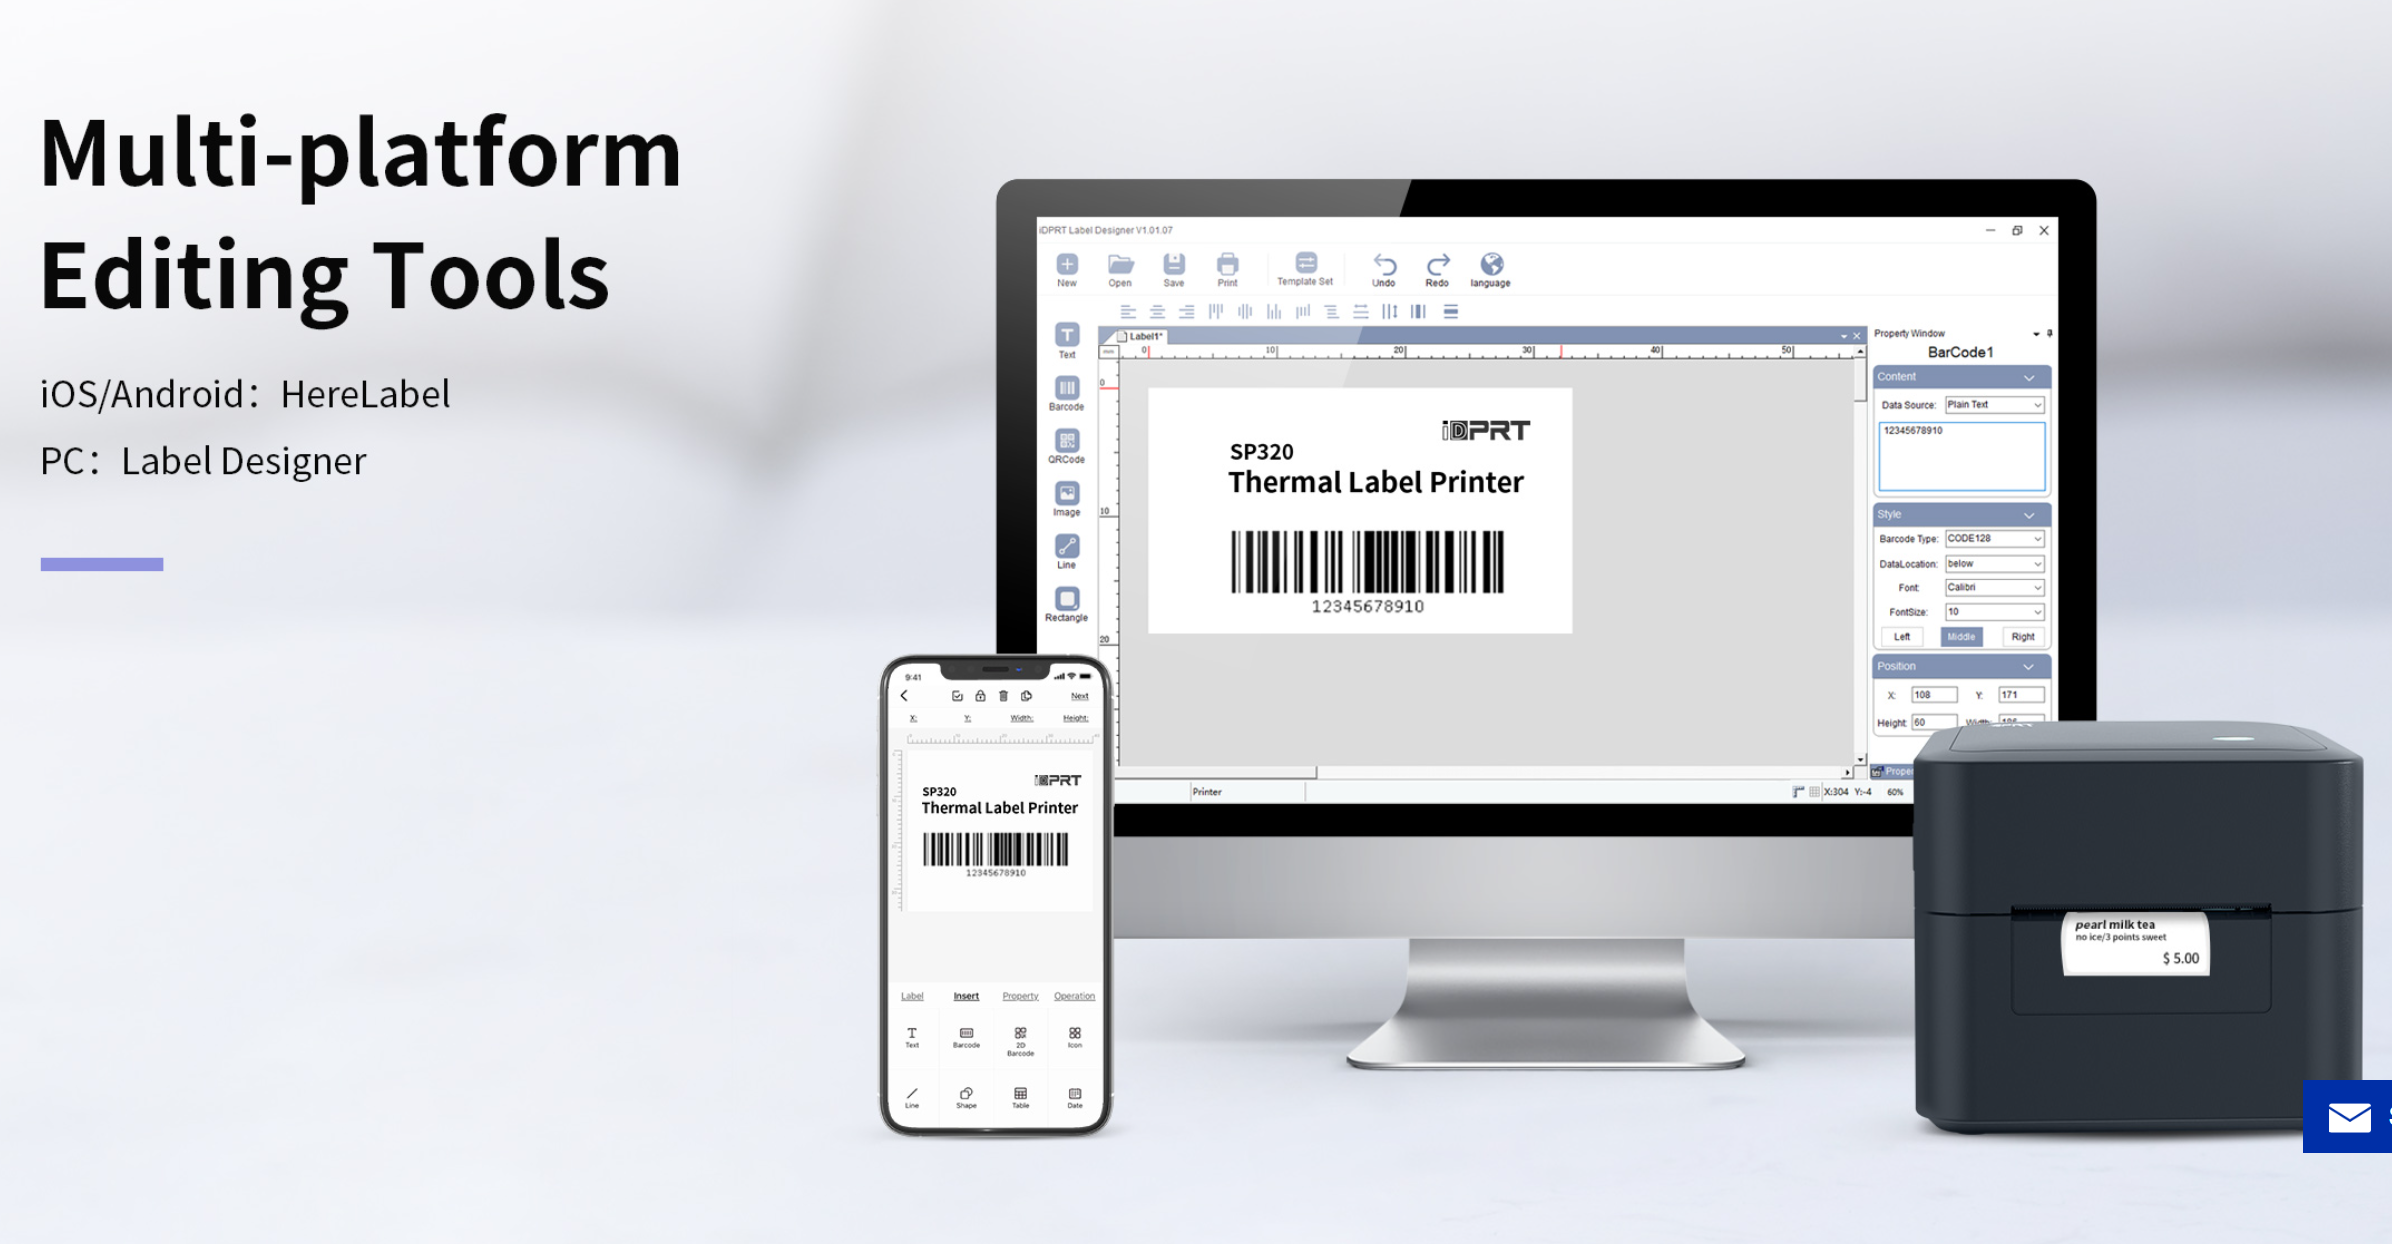 Open the iDPRT label designer application online or download the app on your phone, then create a new label template.